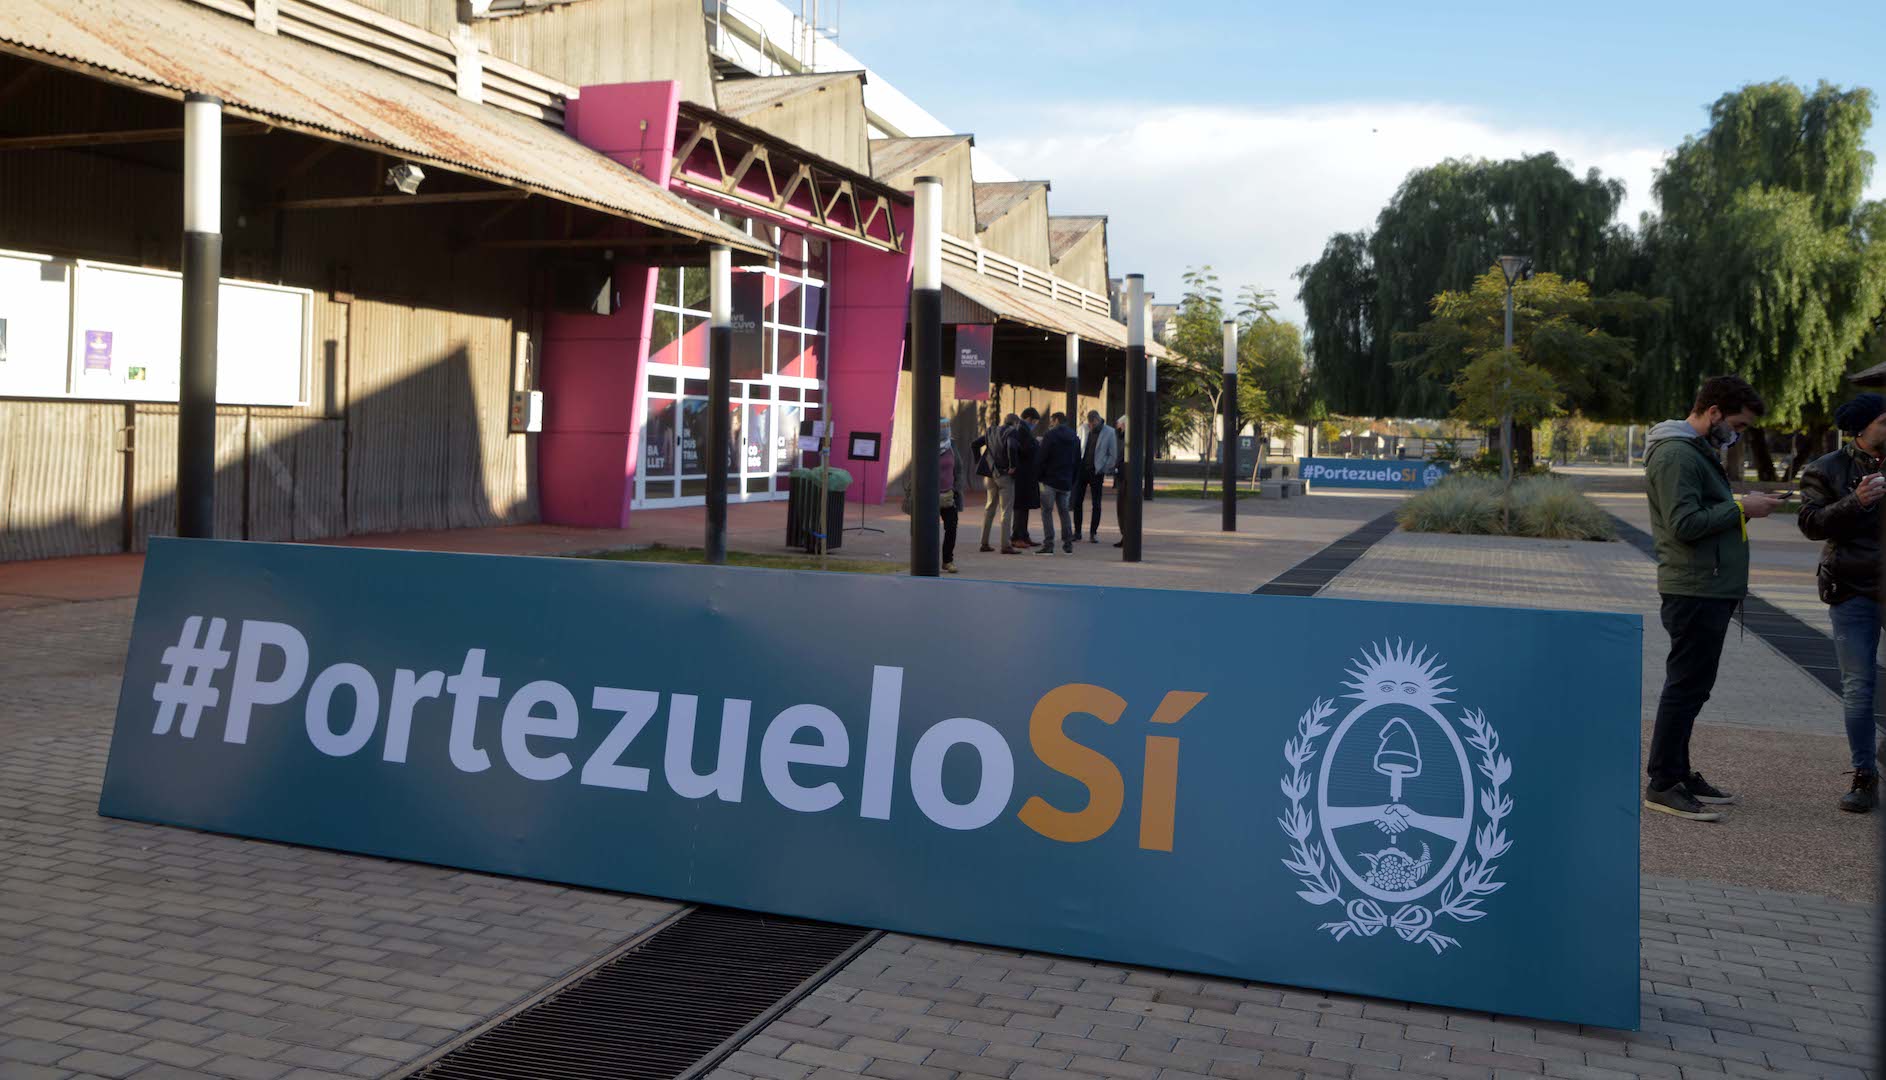 A banner in the street that reads 'Portezuelo si'